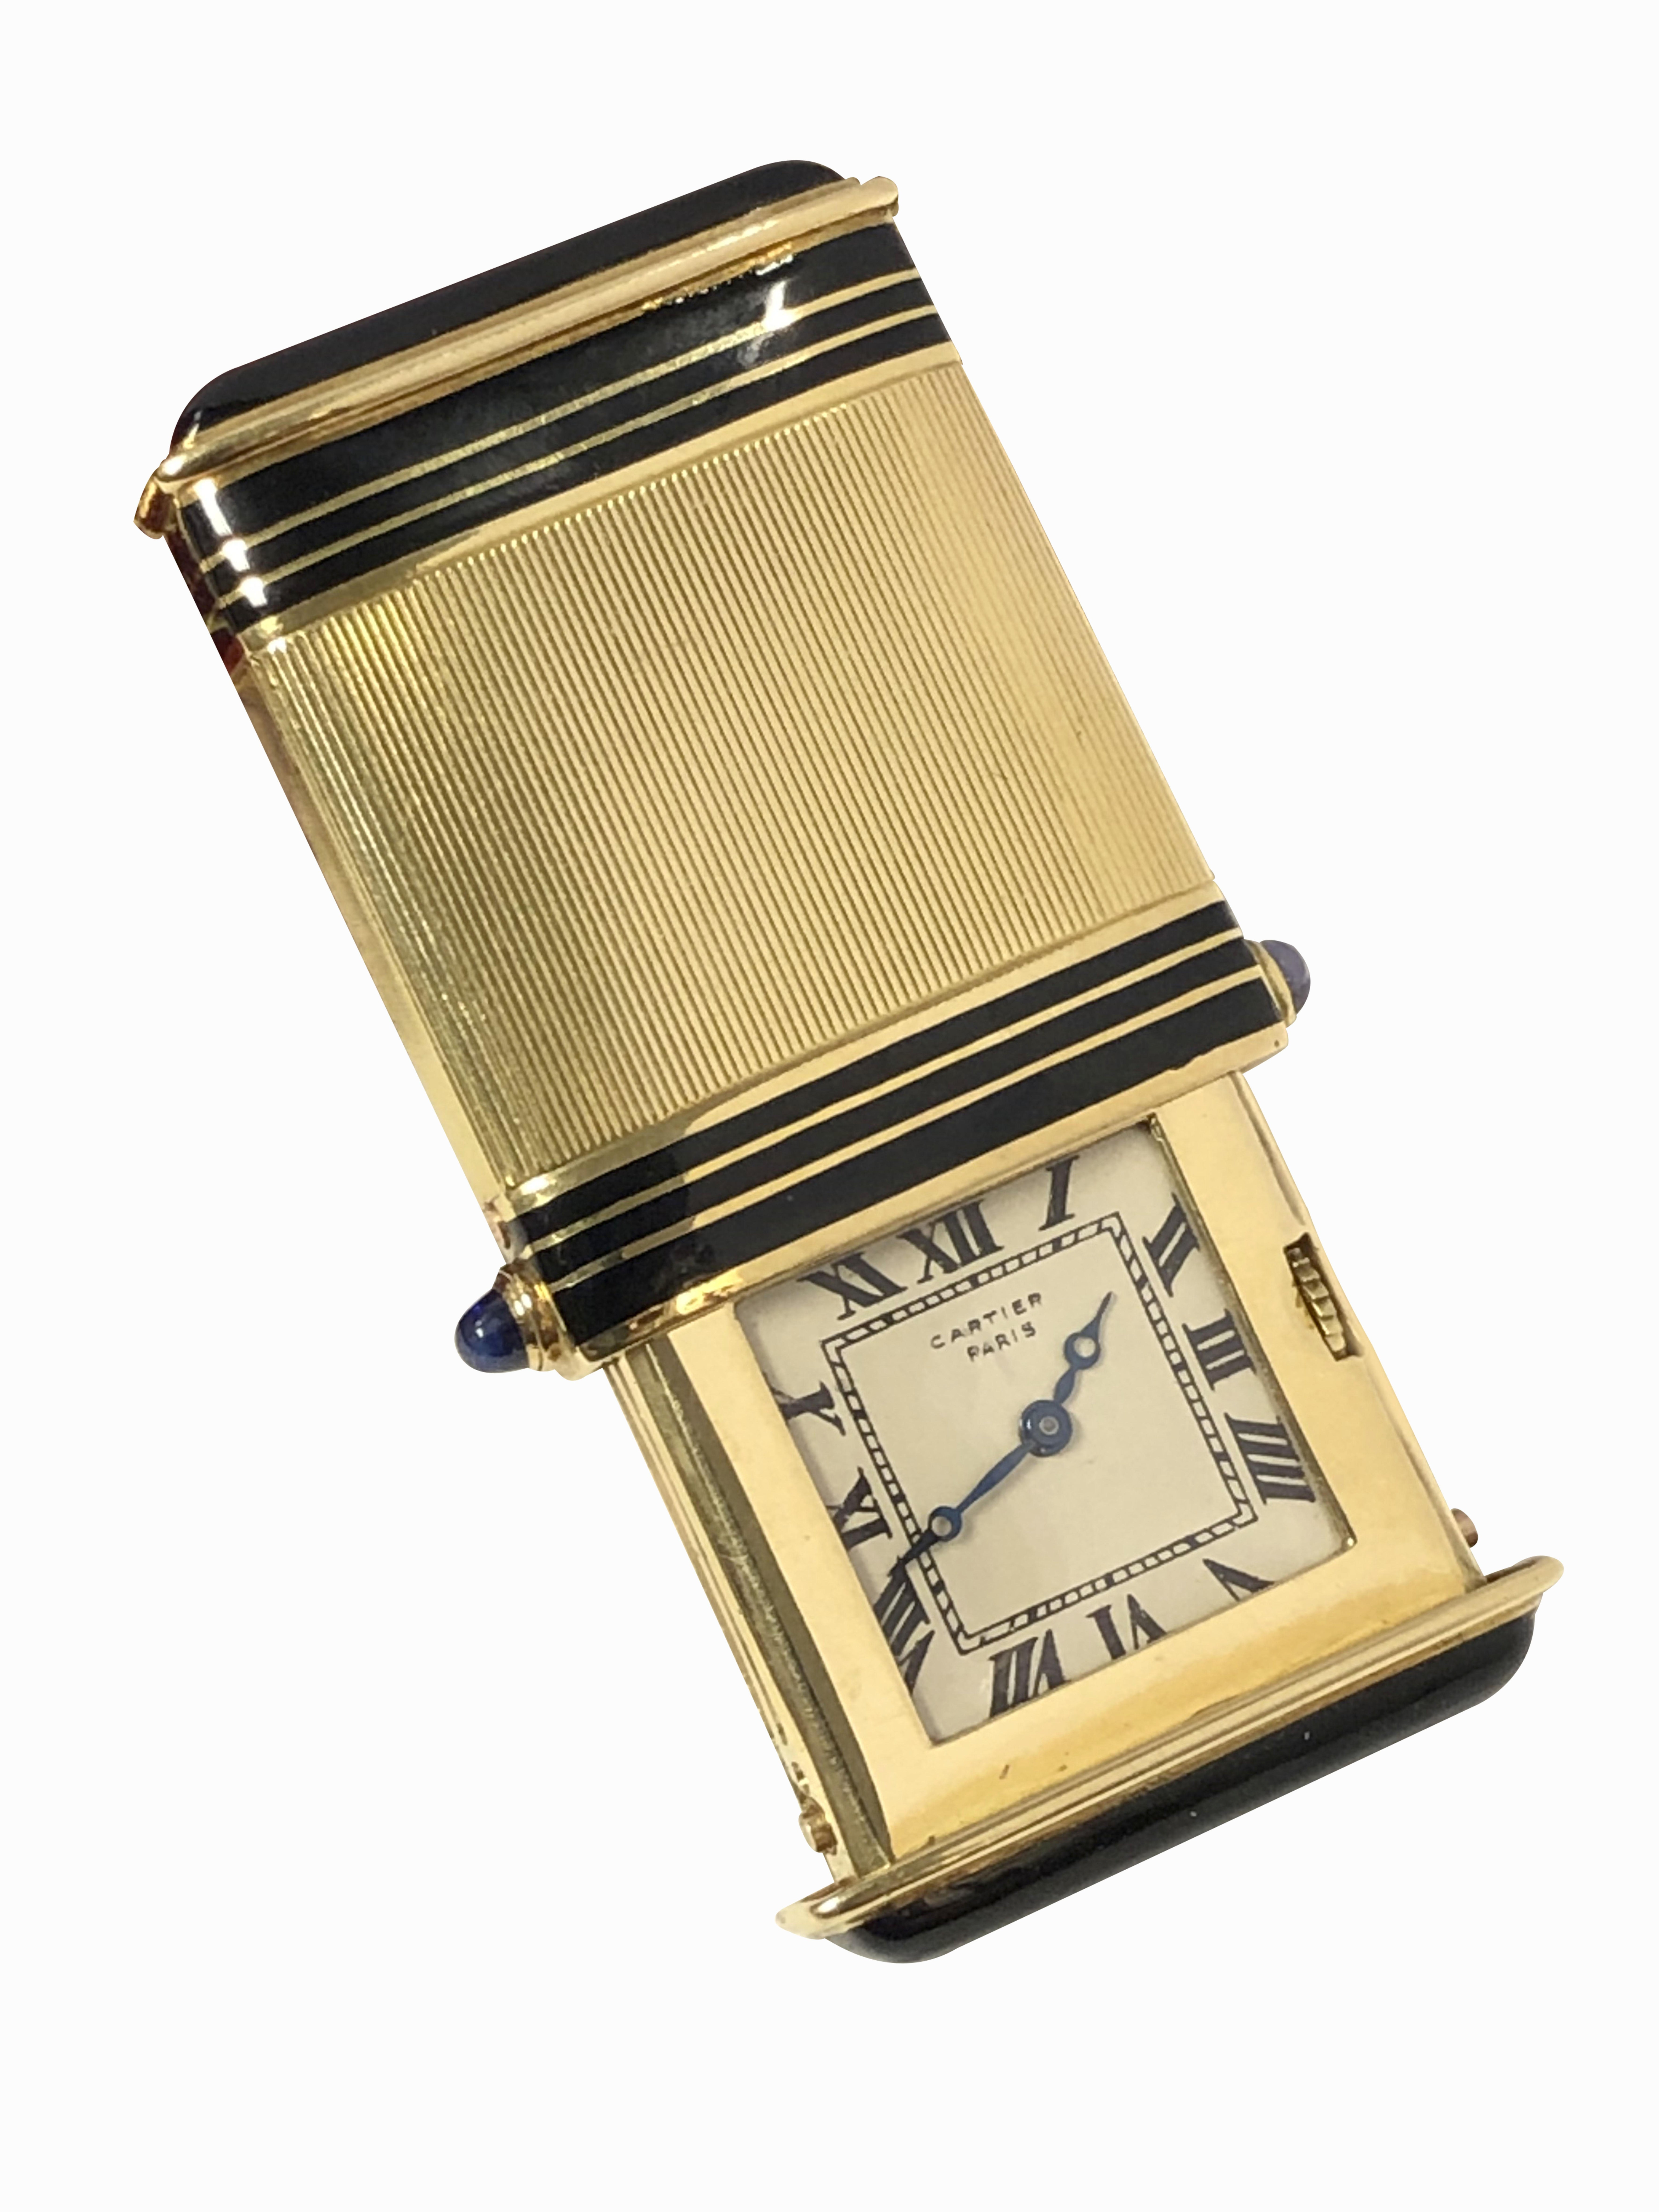 Circa 1920s Cartier Paris Travel Watch, 18K Yellow Gold case measuring 1 5/8 X 1 1/4 inch and 1/4 inch thick,. Ribbed design work and Black Enamel, 2 Cabochon Sapphires depress a spring loaded mechanism to release the watch out of its case. EWC,